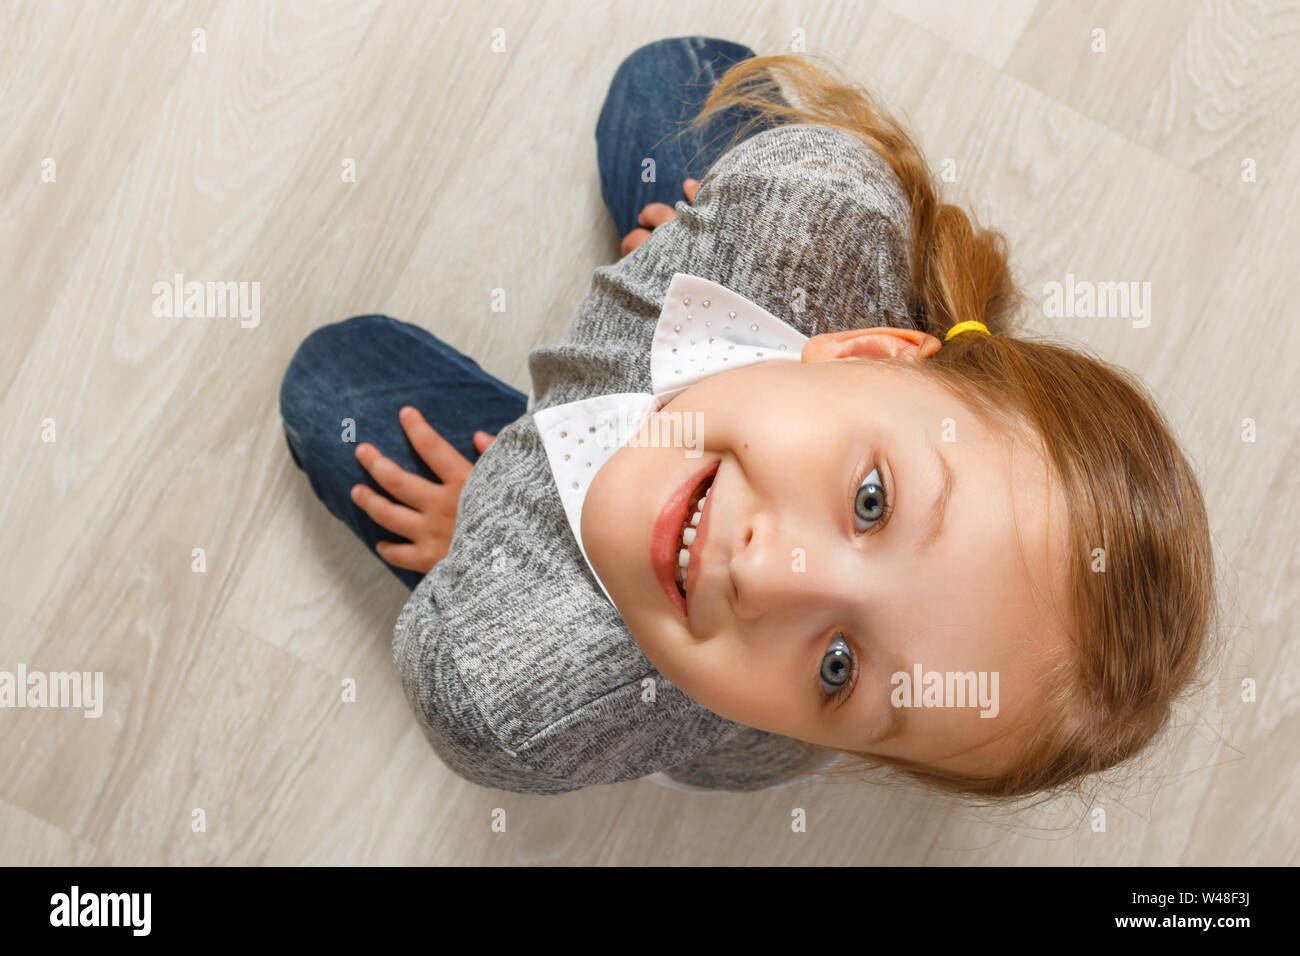 Top view of a child sitting on the floor. The little girl raised her head up and looking into the camera. Stock Photo